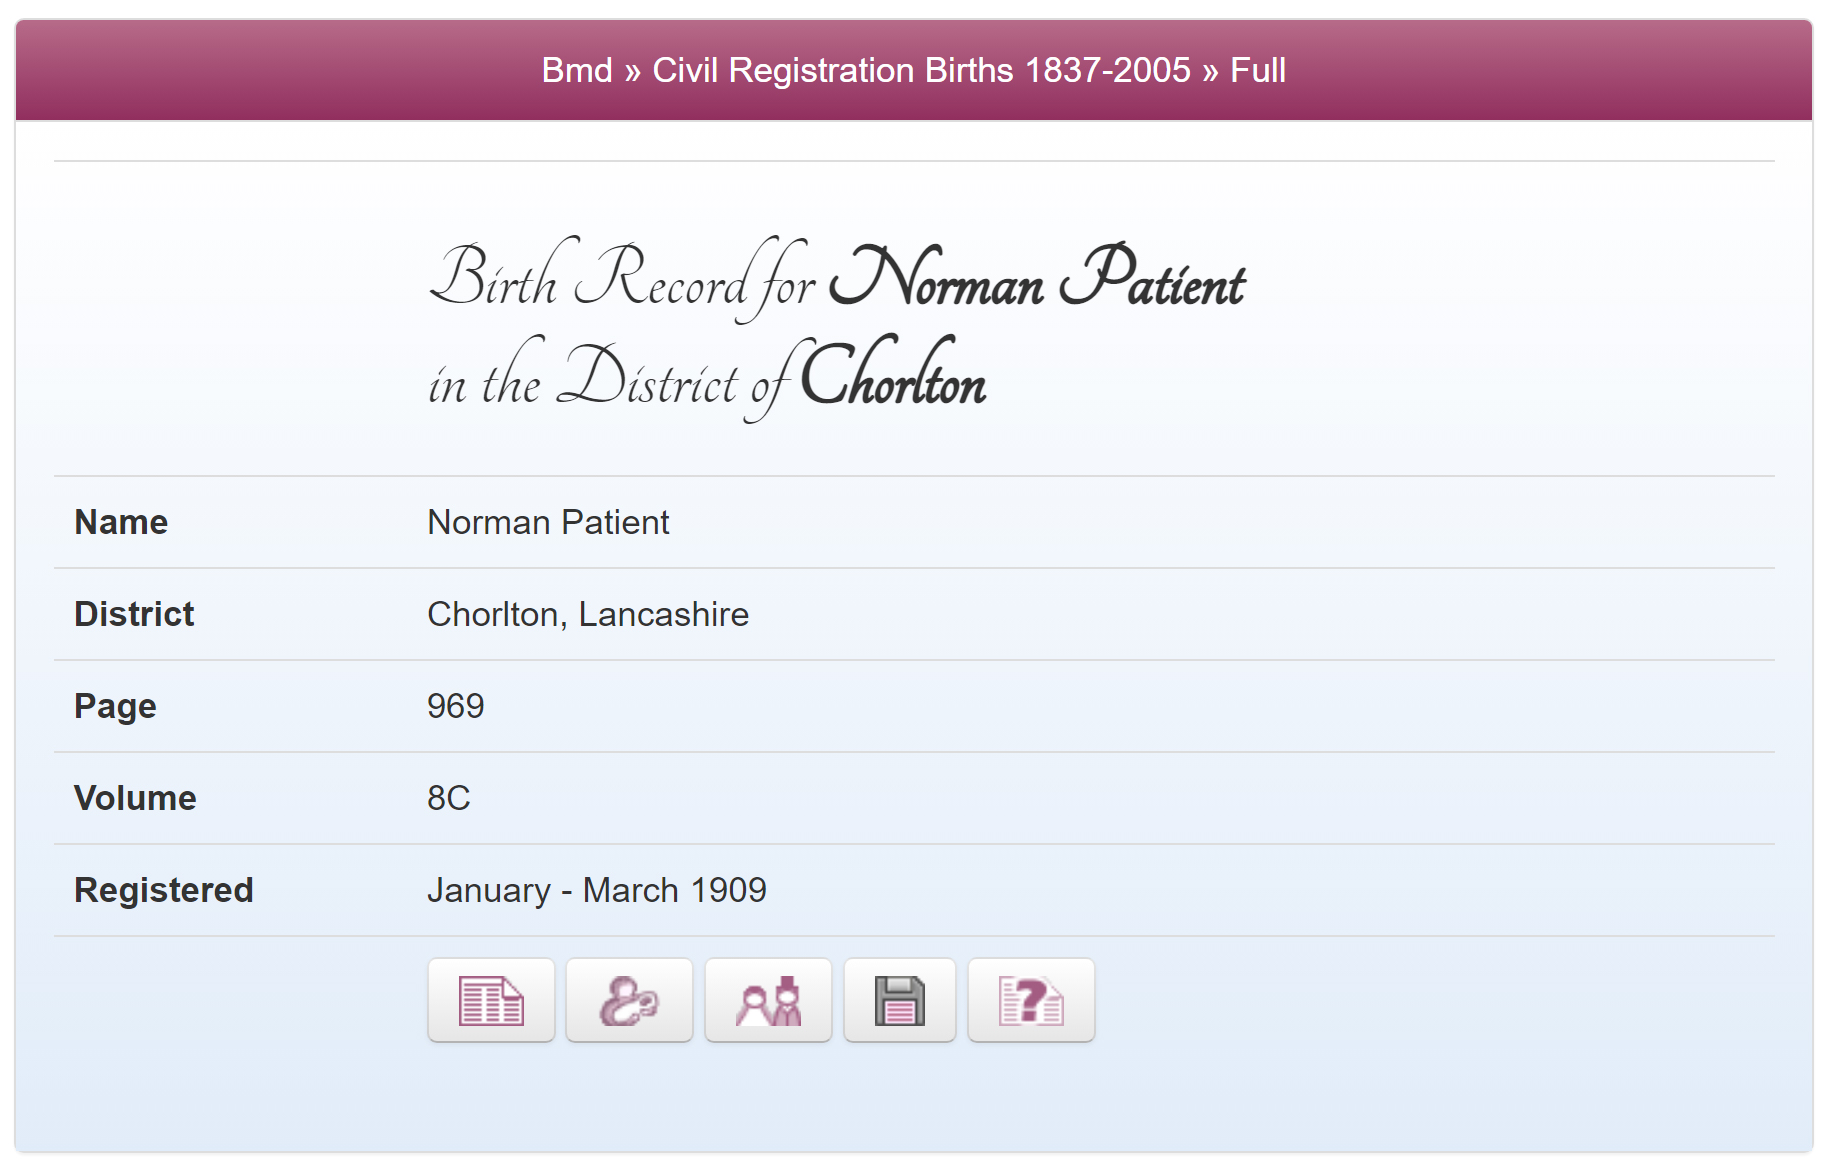 Norman Patient's birth record